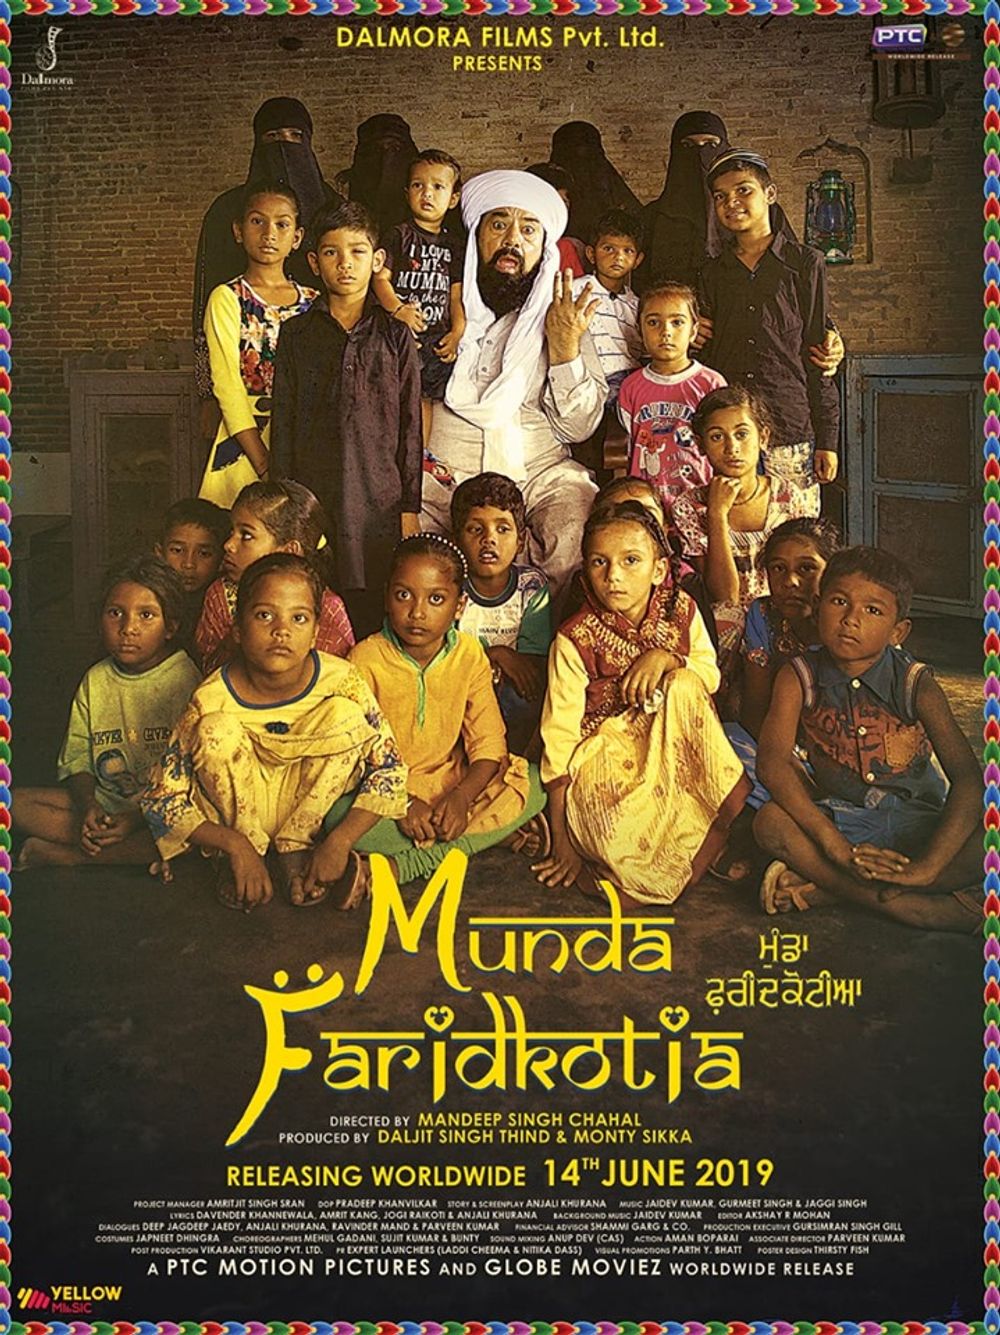 Munda Faridkotia On Moviebuff Com Where to watch munda faridkotia munda faridkotia movie free online we let you watch movies online without having to register or paying, with over 10000 movies. munda faridkotia on moviebuff com